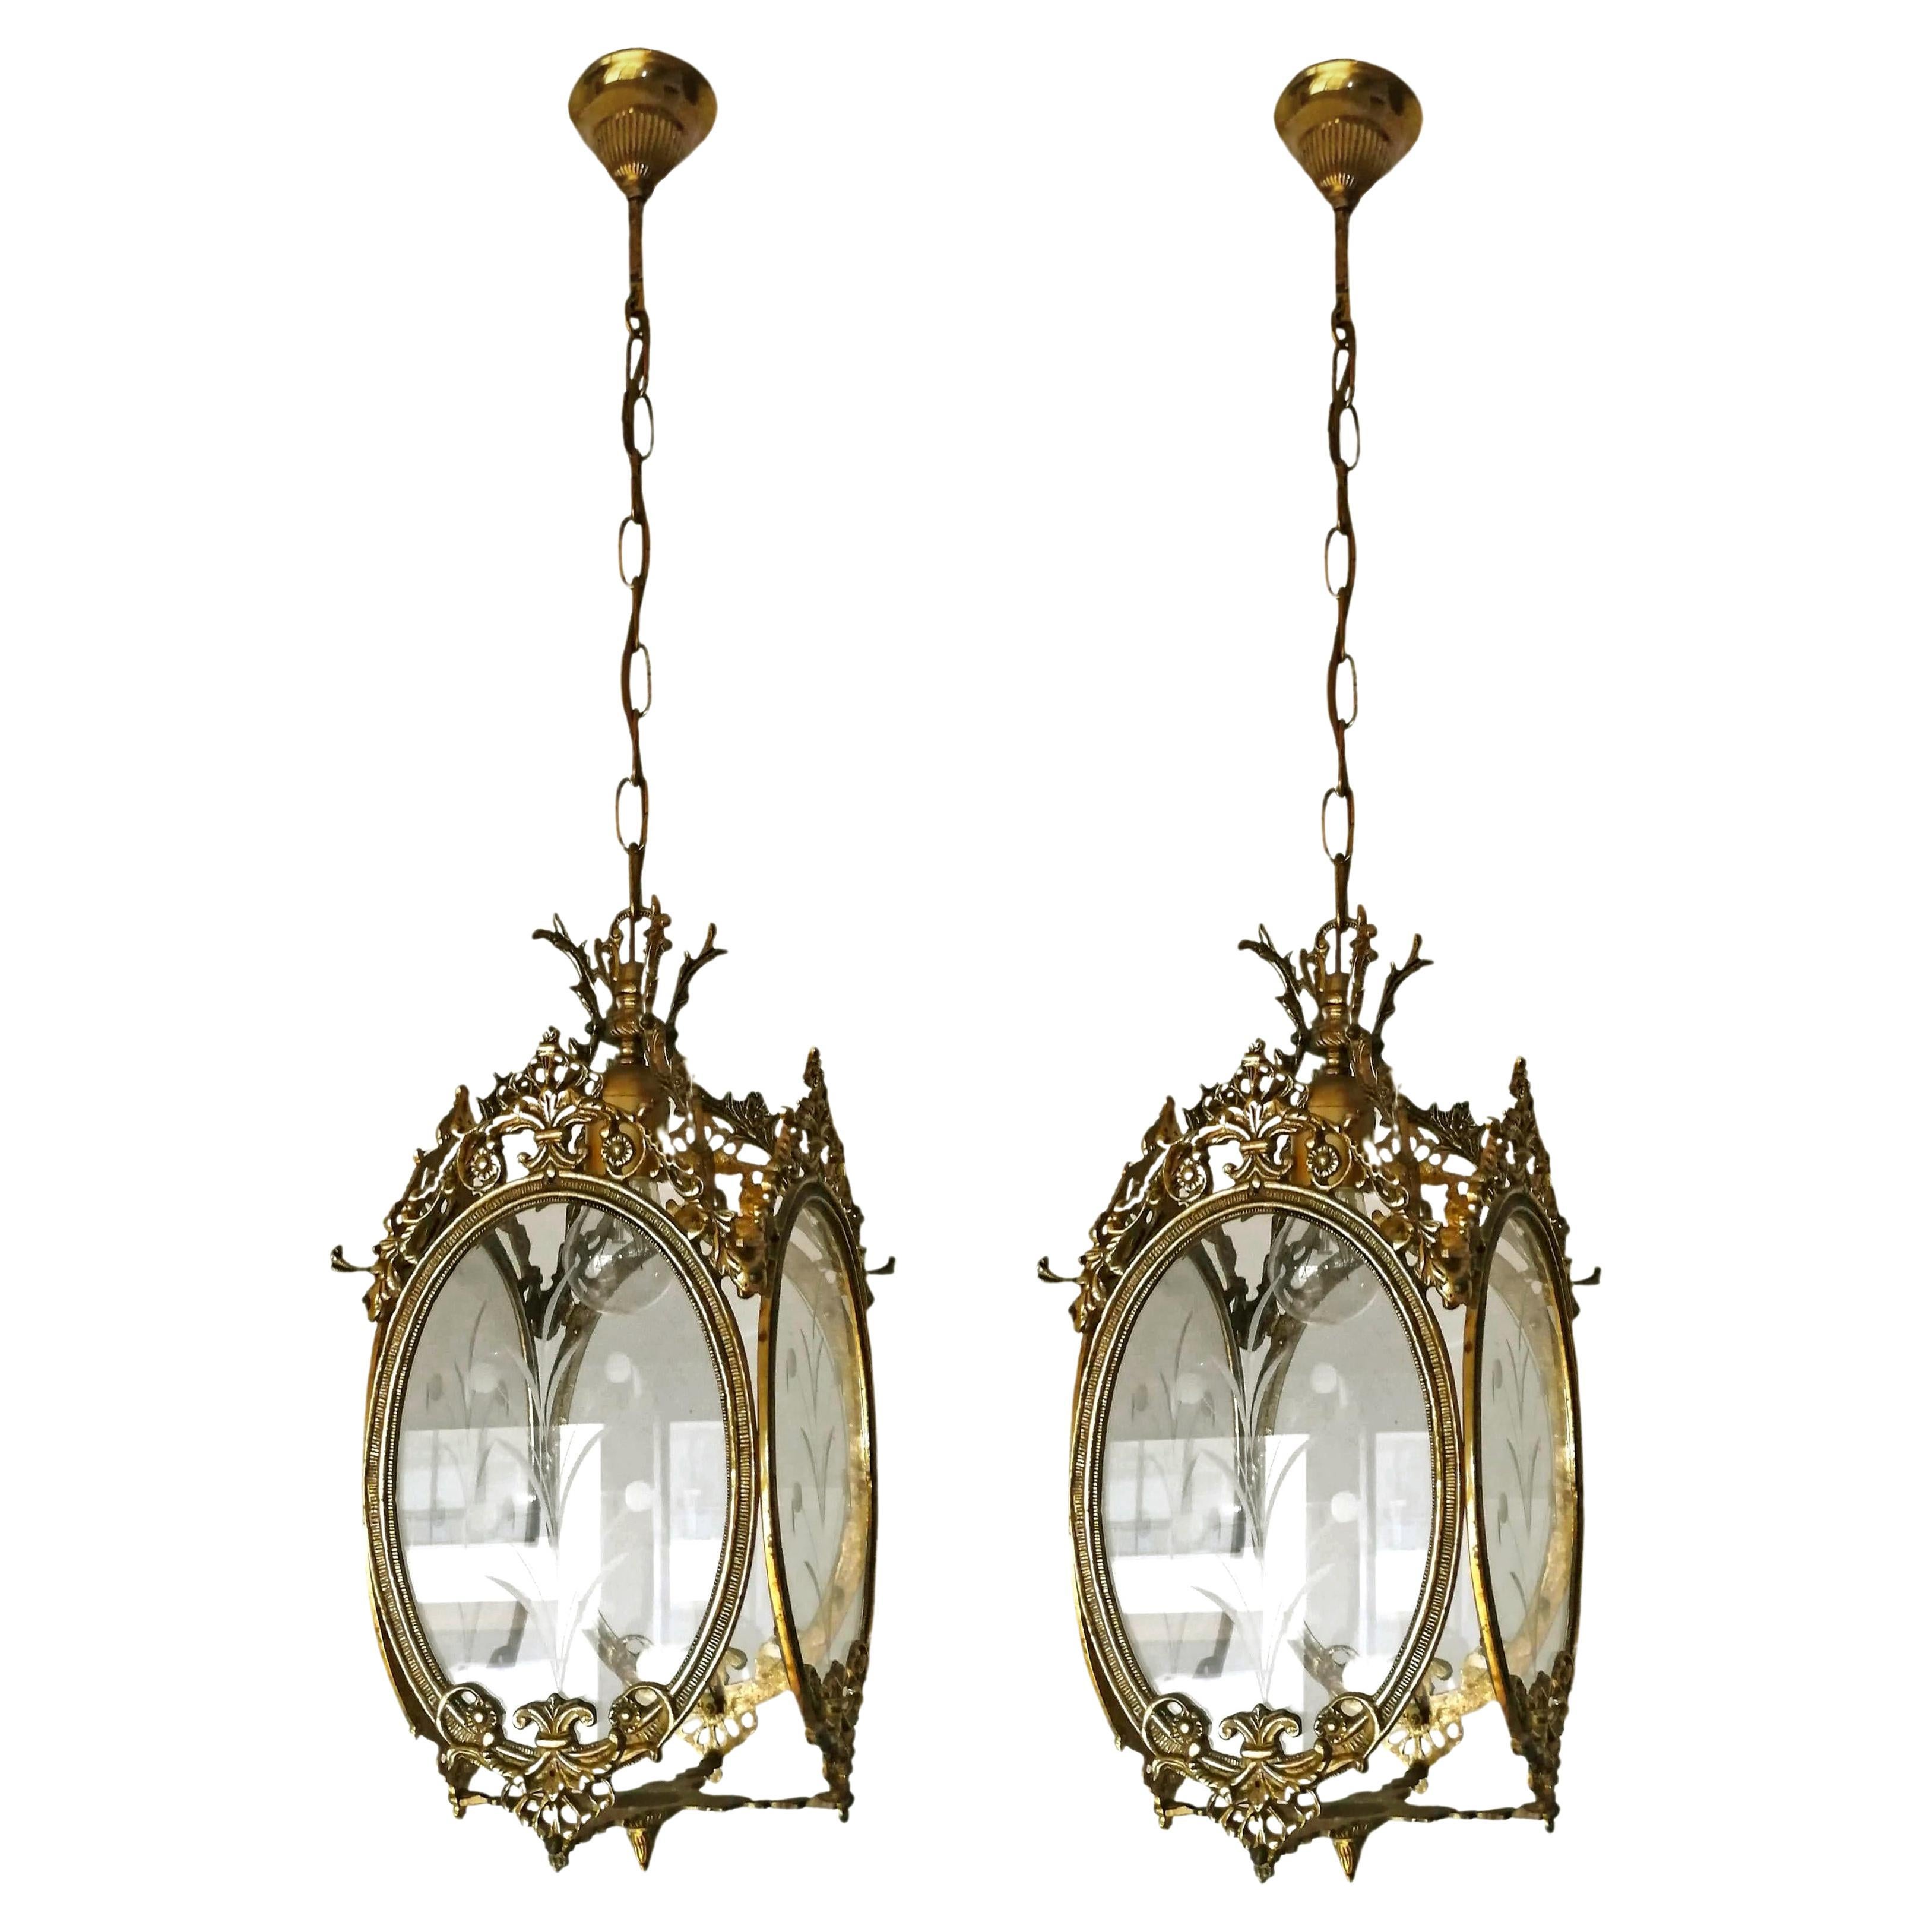 Pair of Antique Louis XVI French Lanterns Chandeliers in Gilt Bronze & Cut Glass For Sale 2